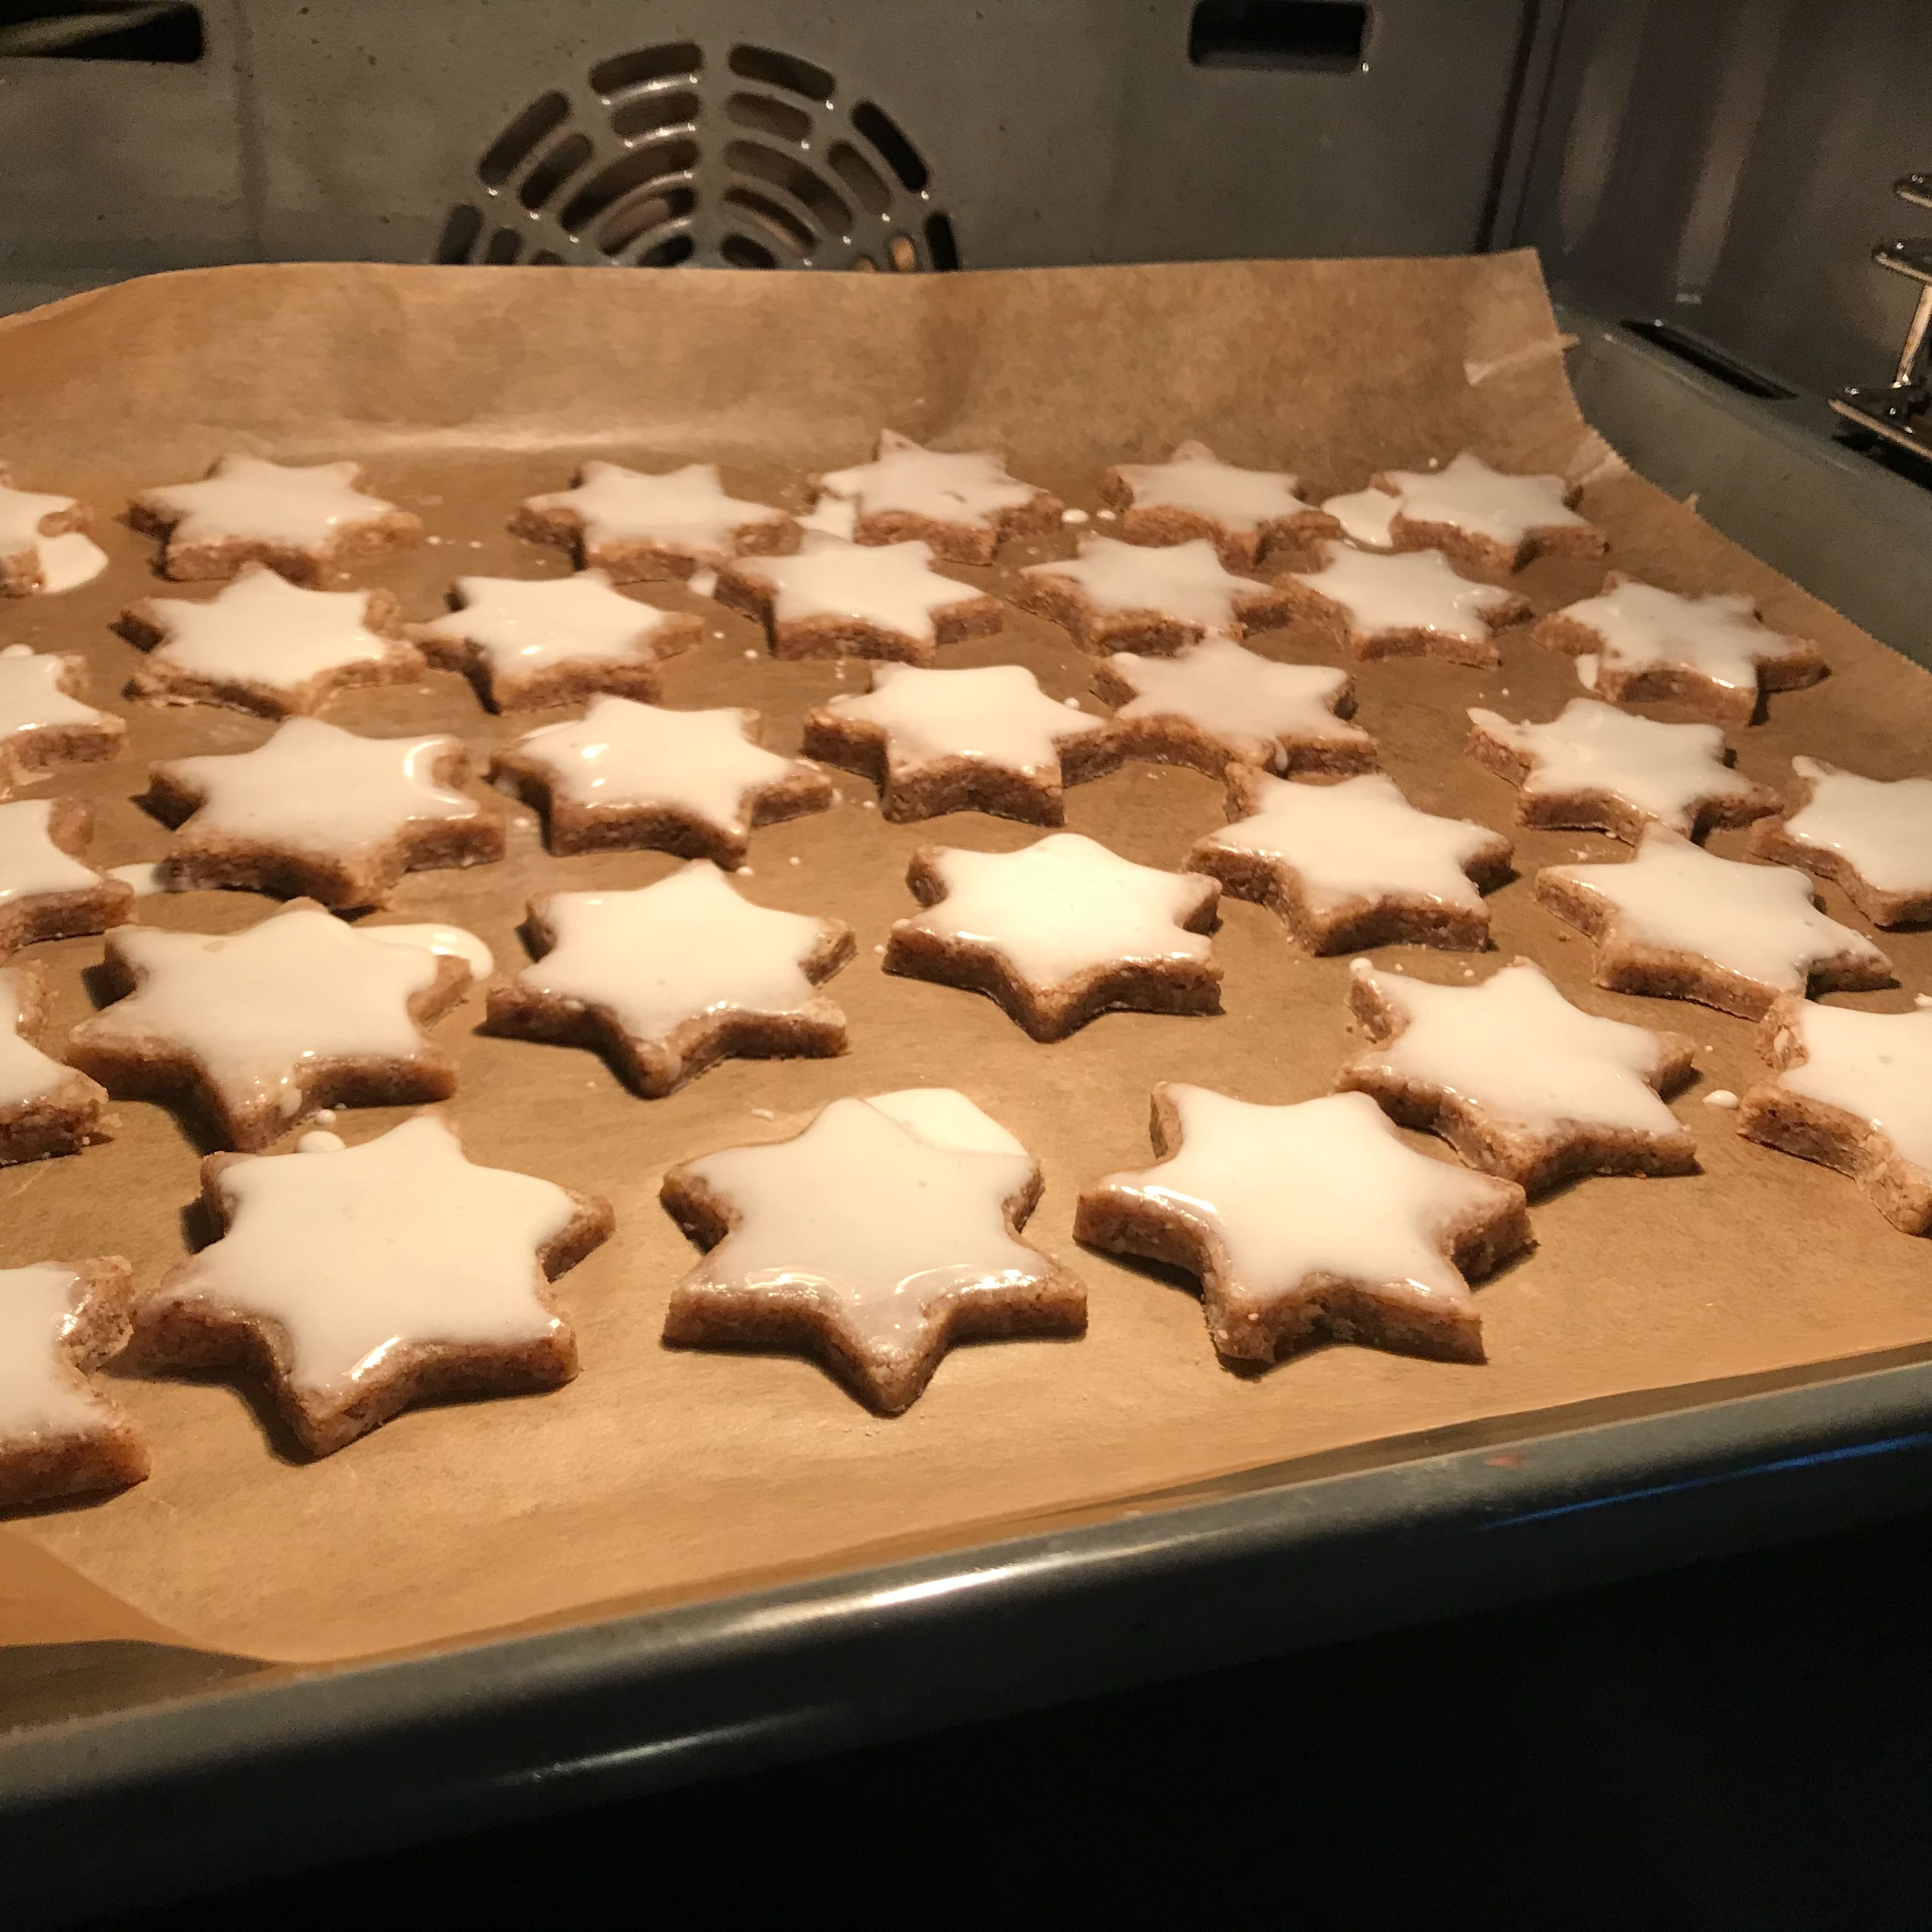 Add ground almonds, powdered sugar, and cinnamon to a bowl and stir together. Add egg white and almond extract and work into a dough. Roll out with a rolling pin on a surface dusted with flour. Press out star shapes.